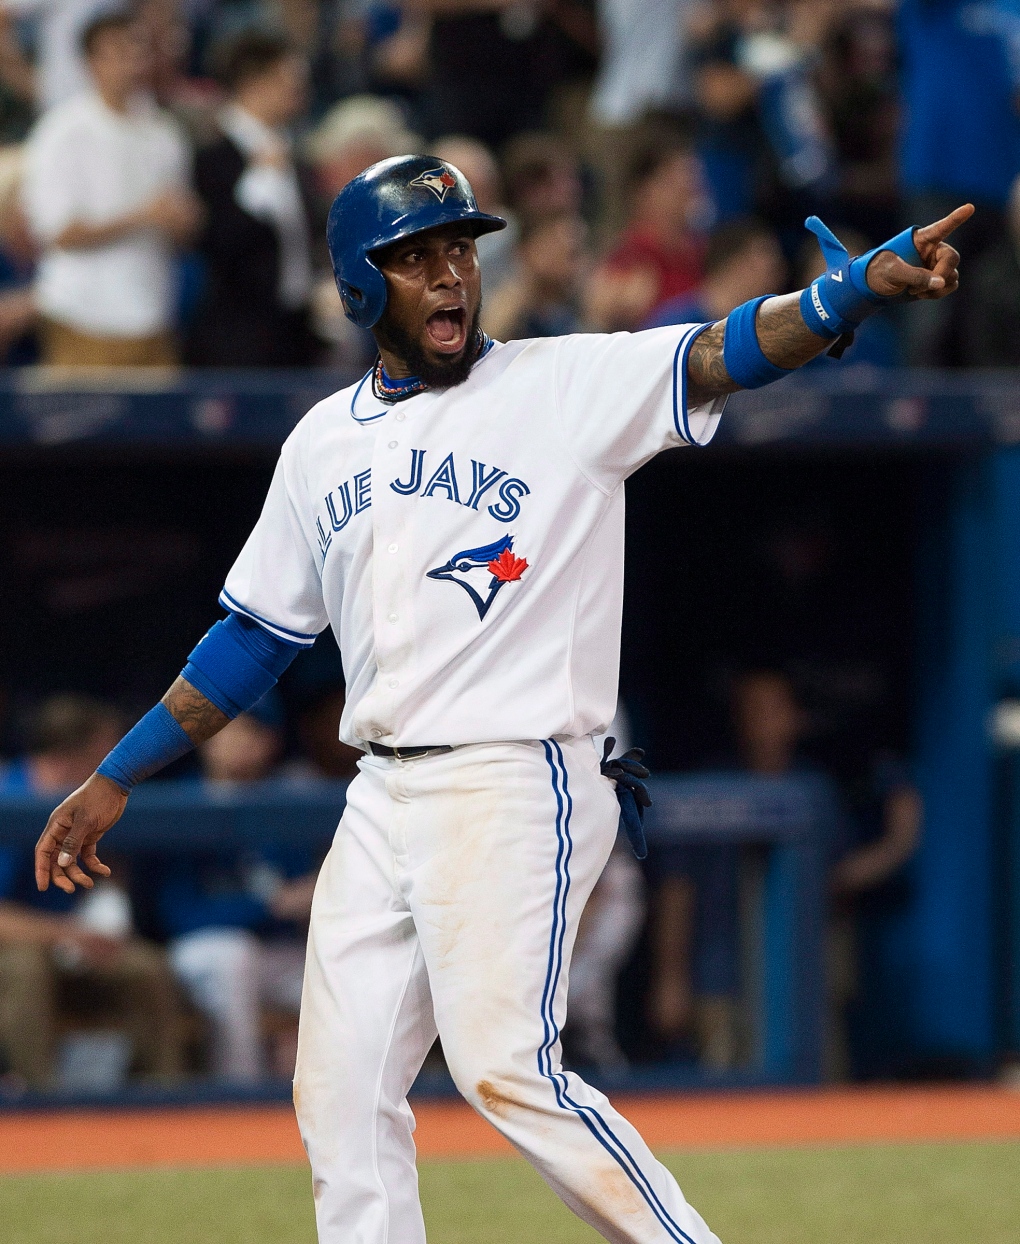 Reyes of Old: Toronto shortstop Jose Reyes healthy and in top form for Jays  | CTV News